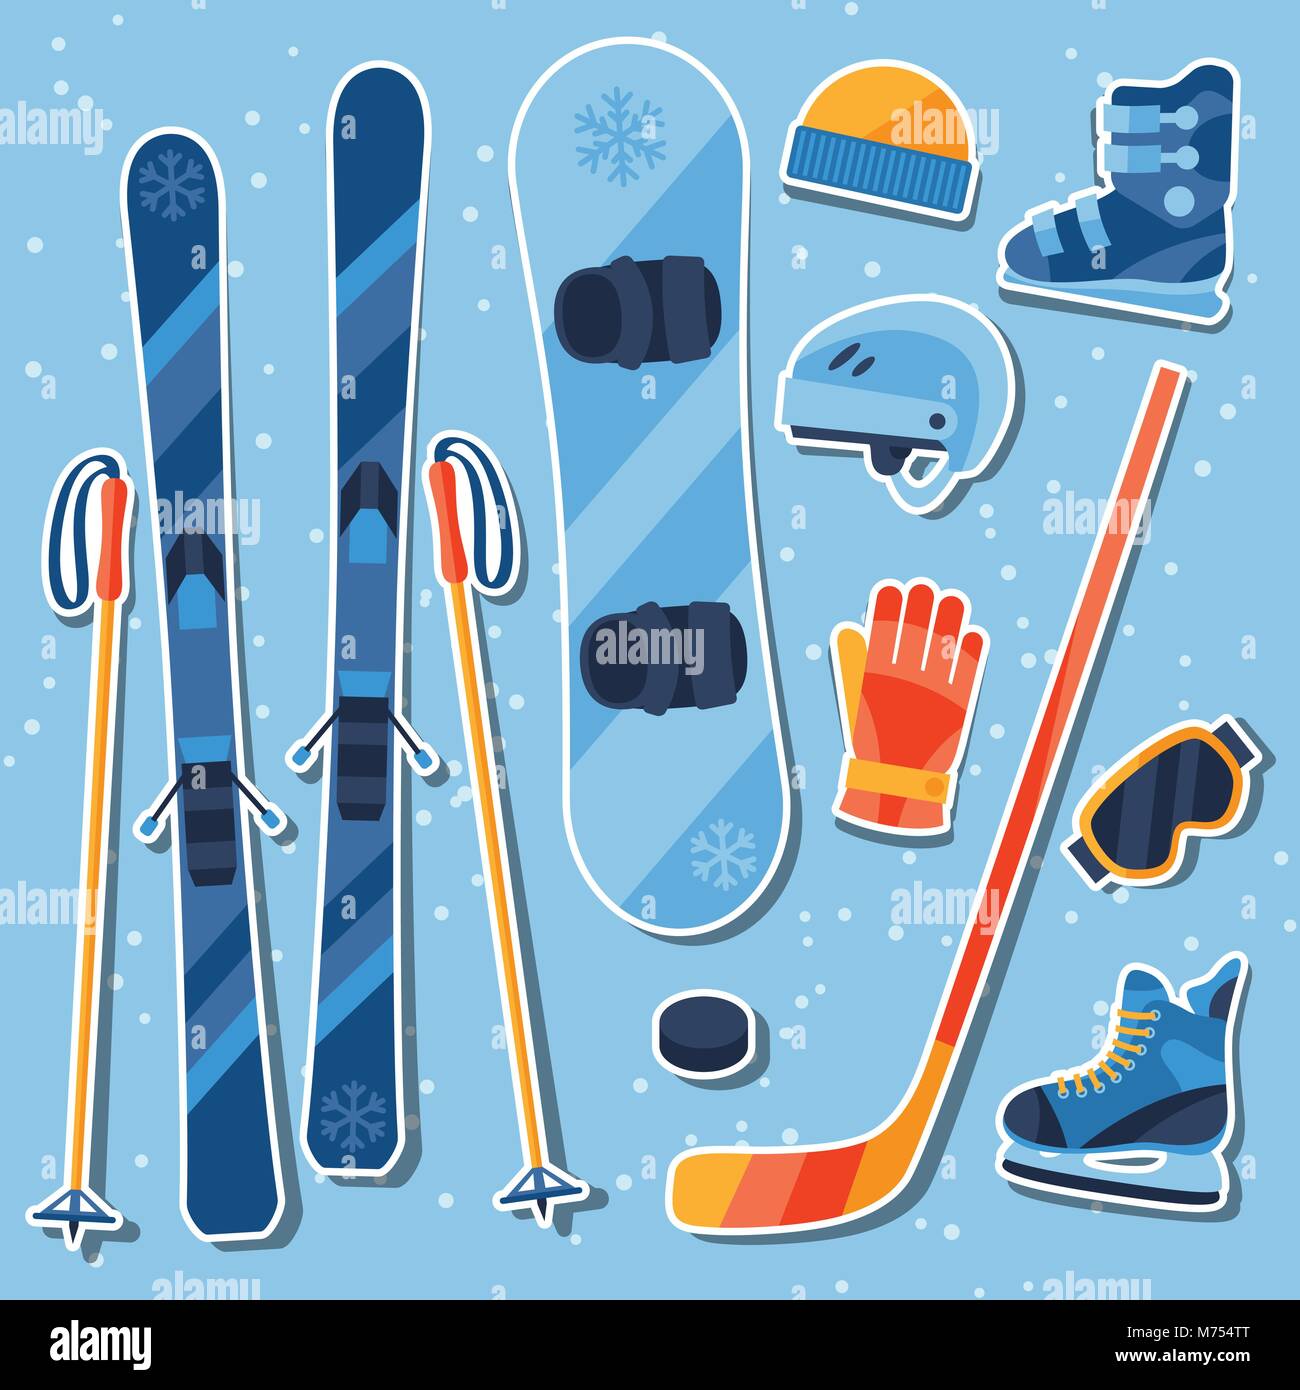 Winter sports equipment sticker icons set in flat design style Stock Vector